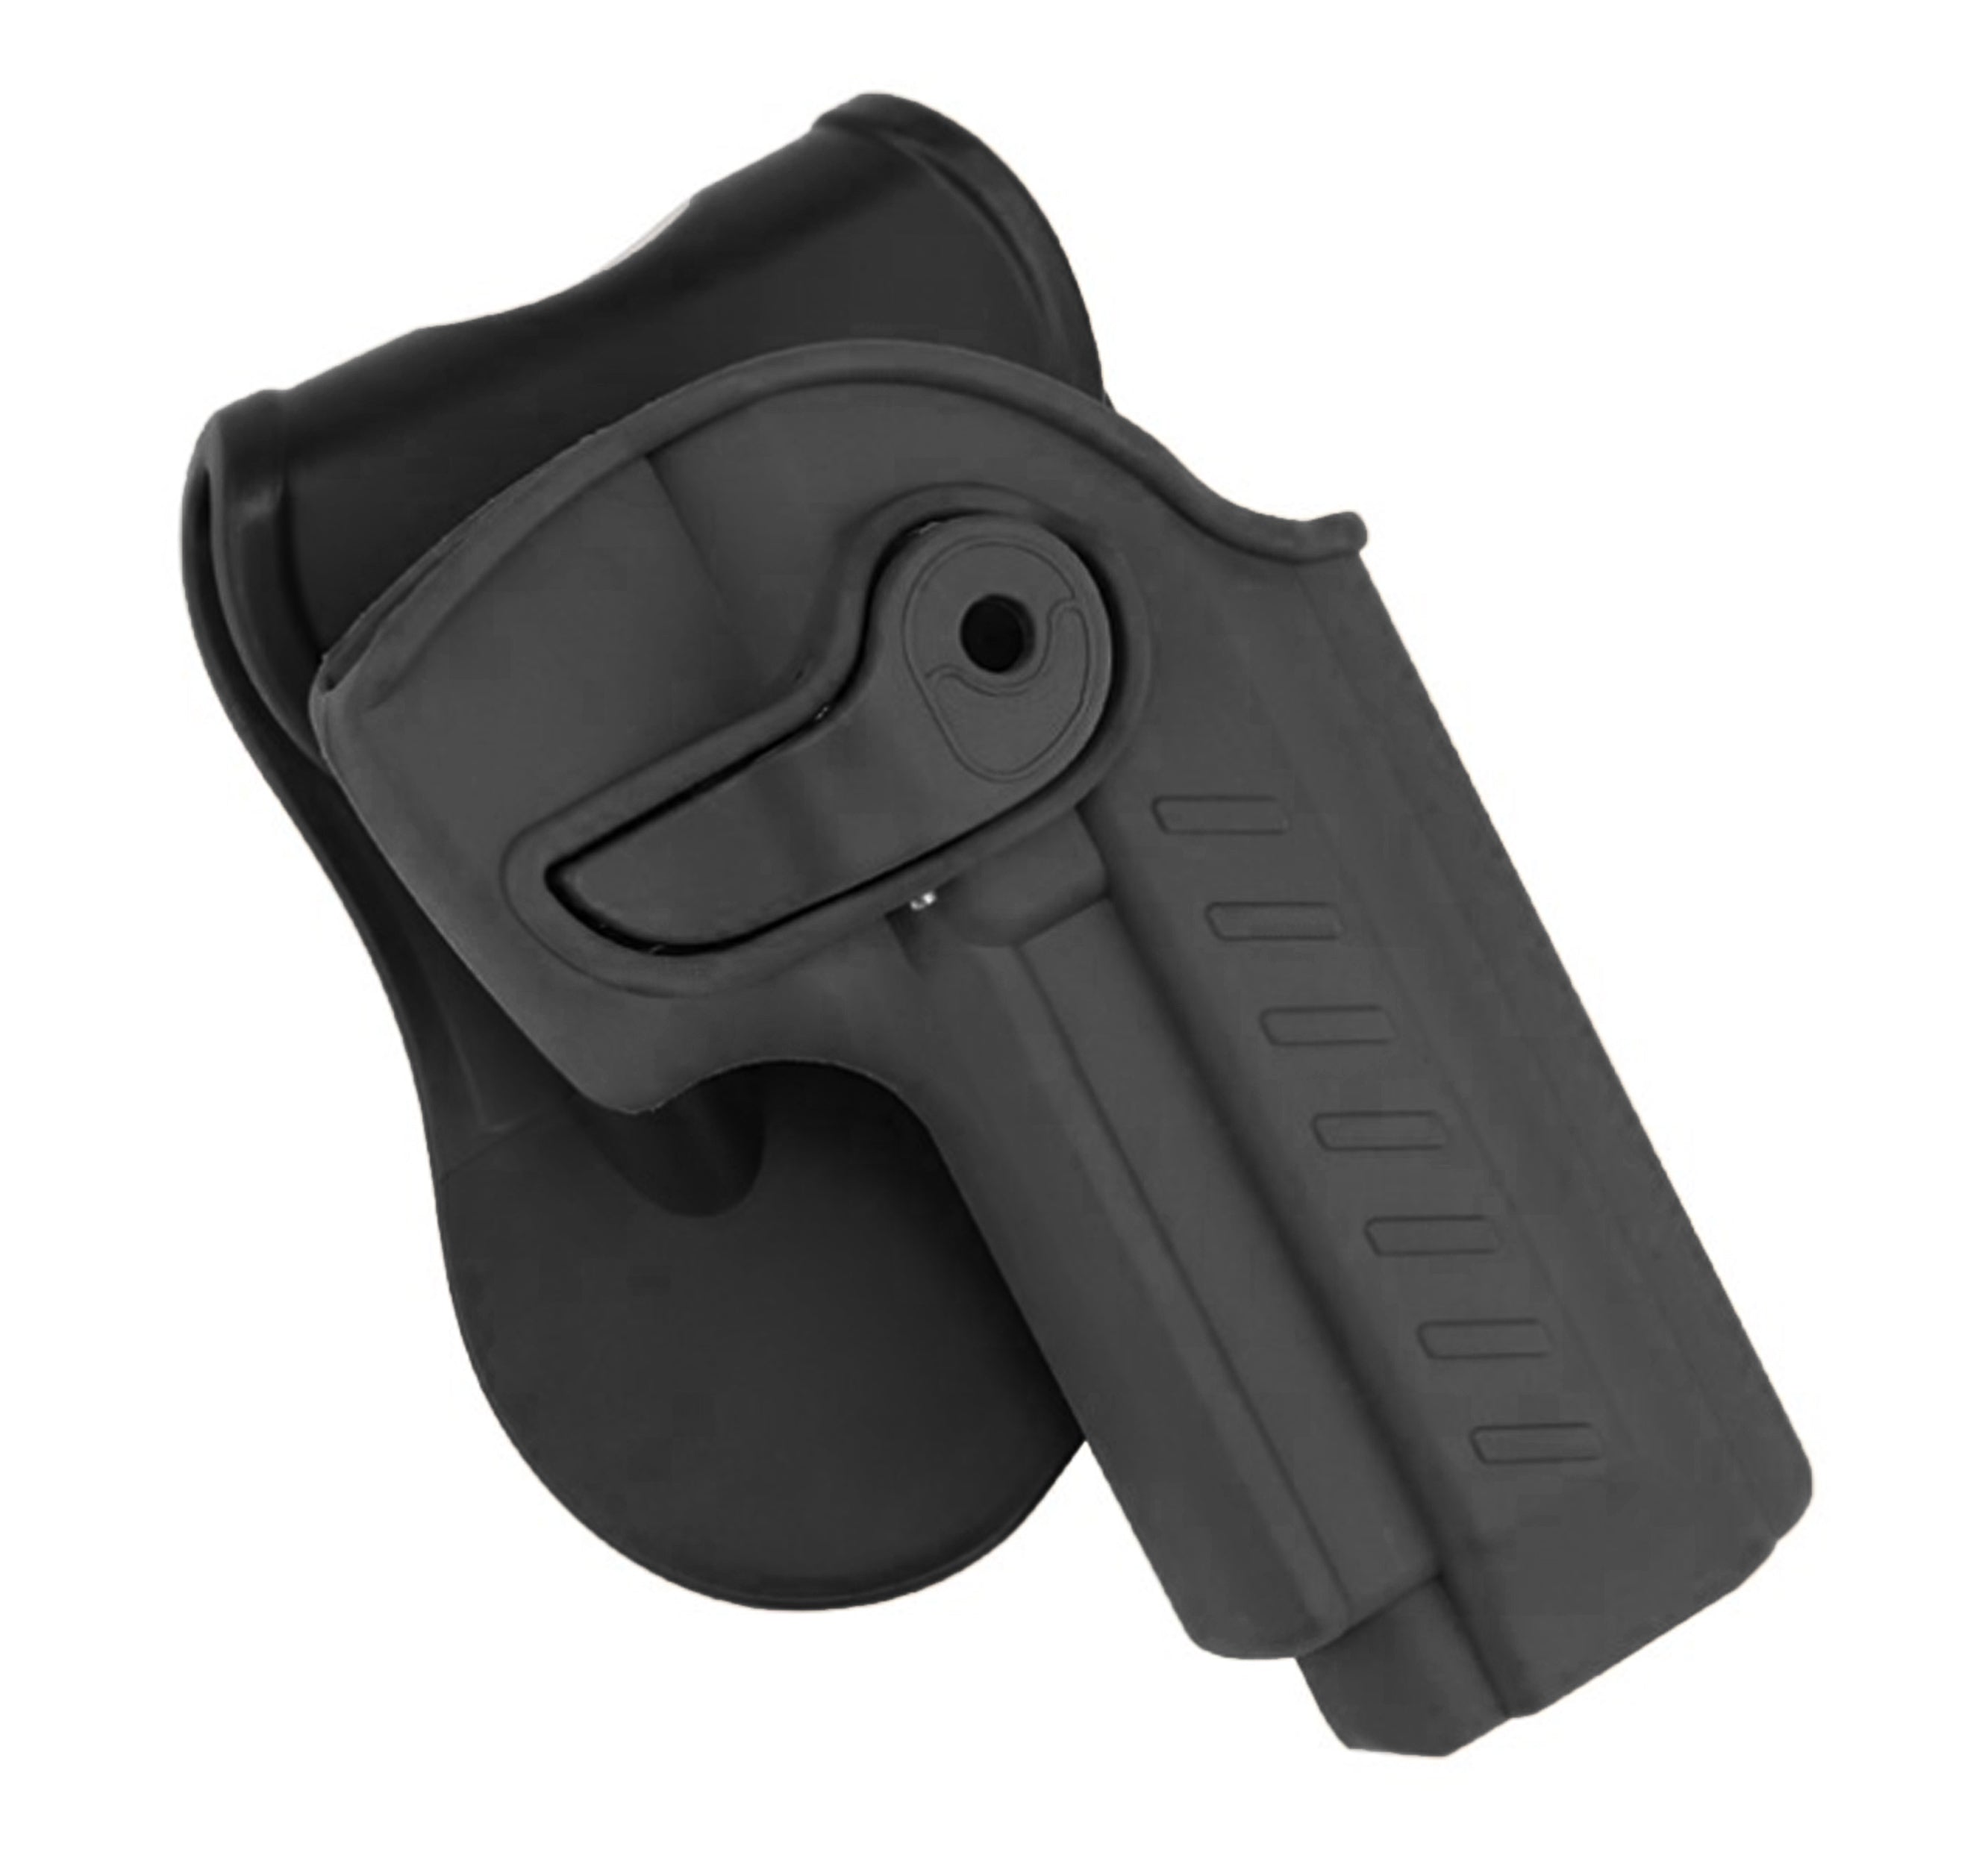 WOSPORT M92 QUICK PULL HOLSTER GB47